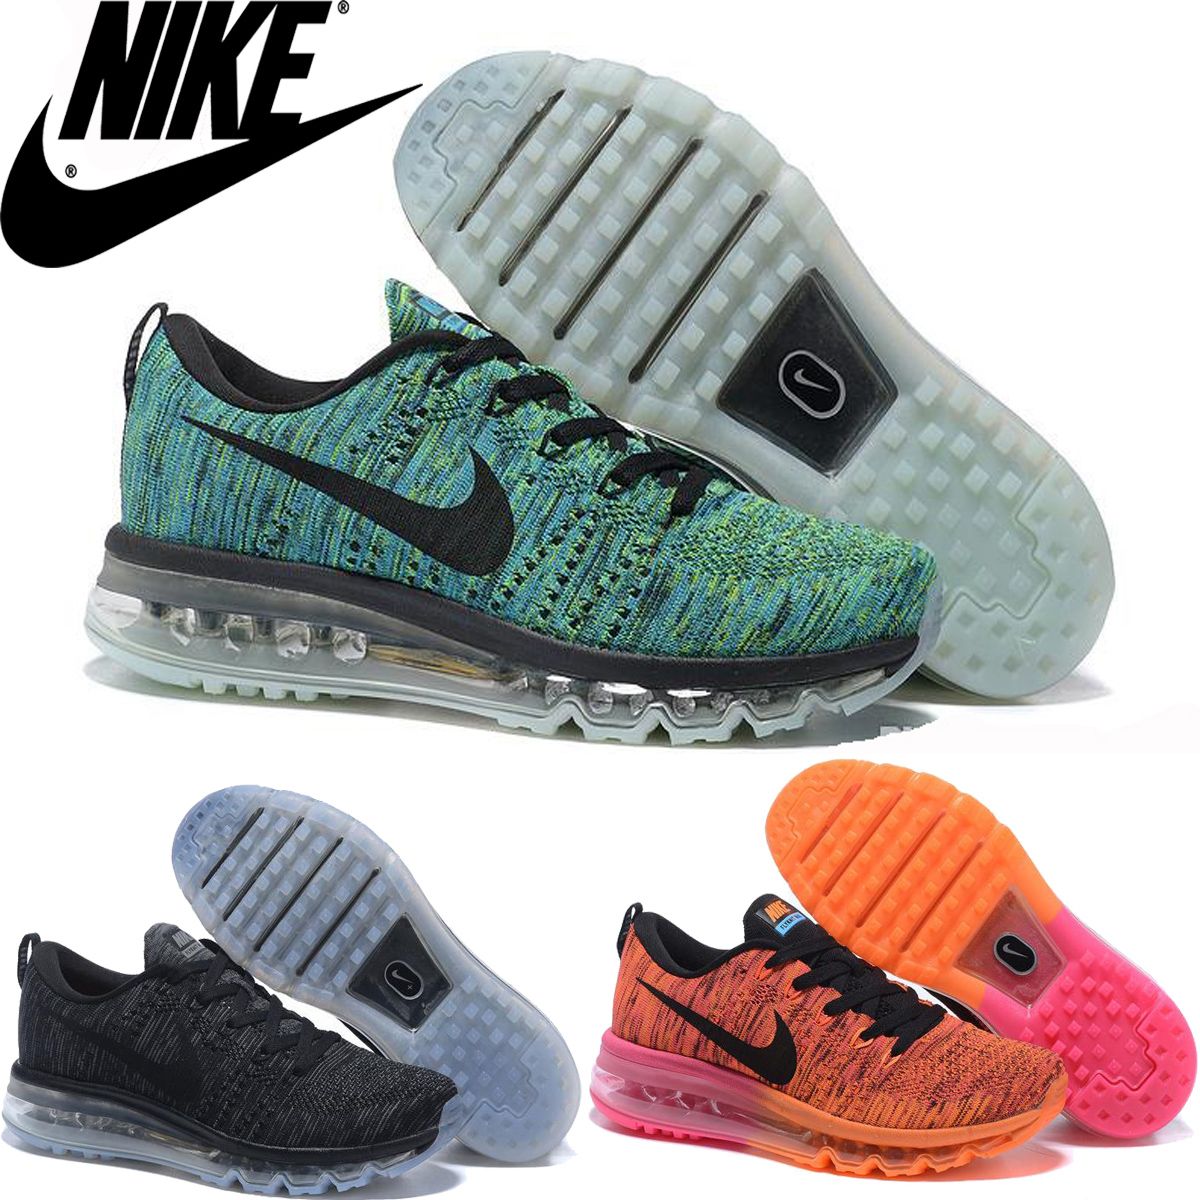 Nike Flyknit Air Max Mens Womens Running Shoes,100% Original Maxes And Women running shoes Flyknit AirMax Shoes Size 36-46